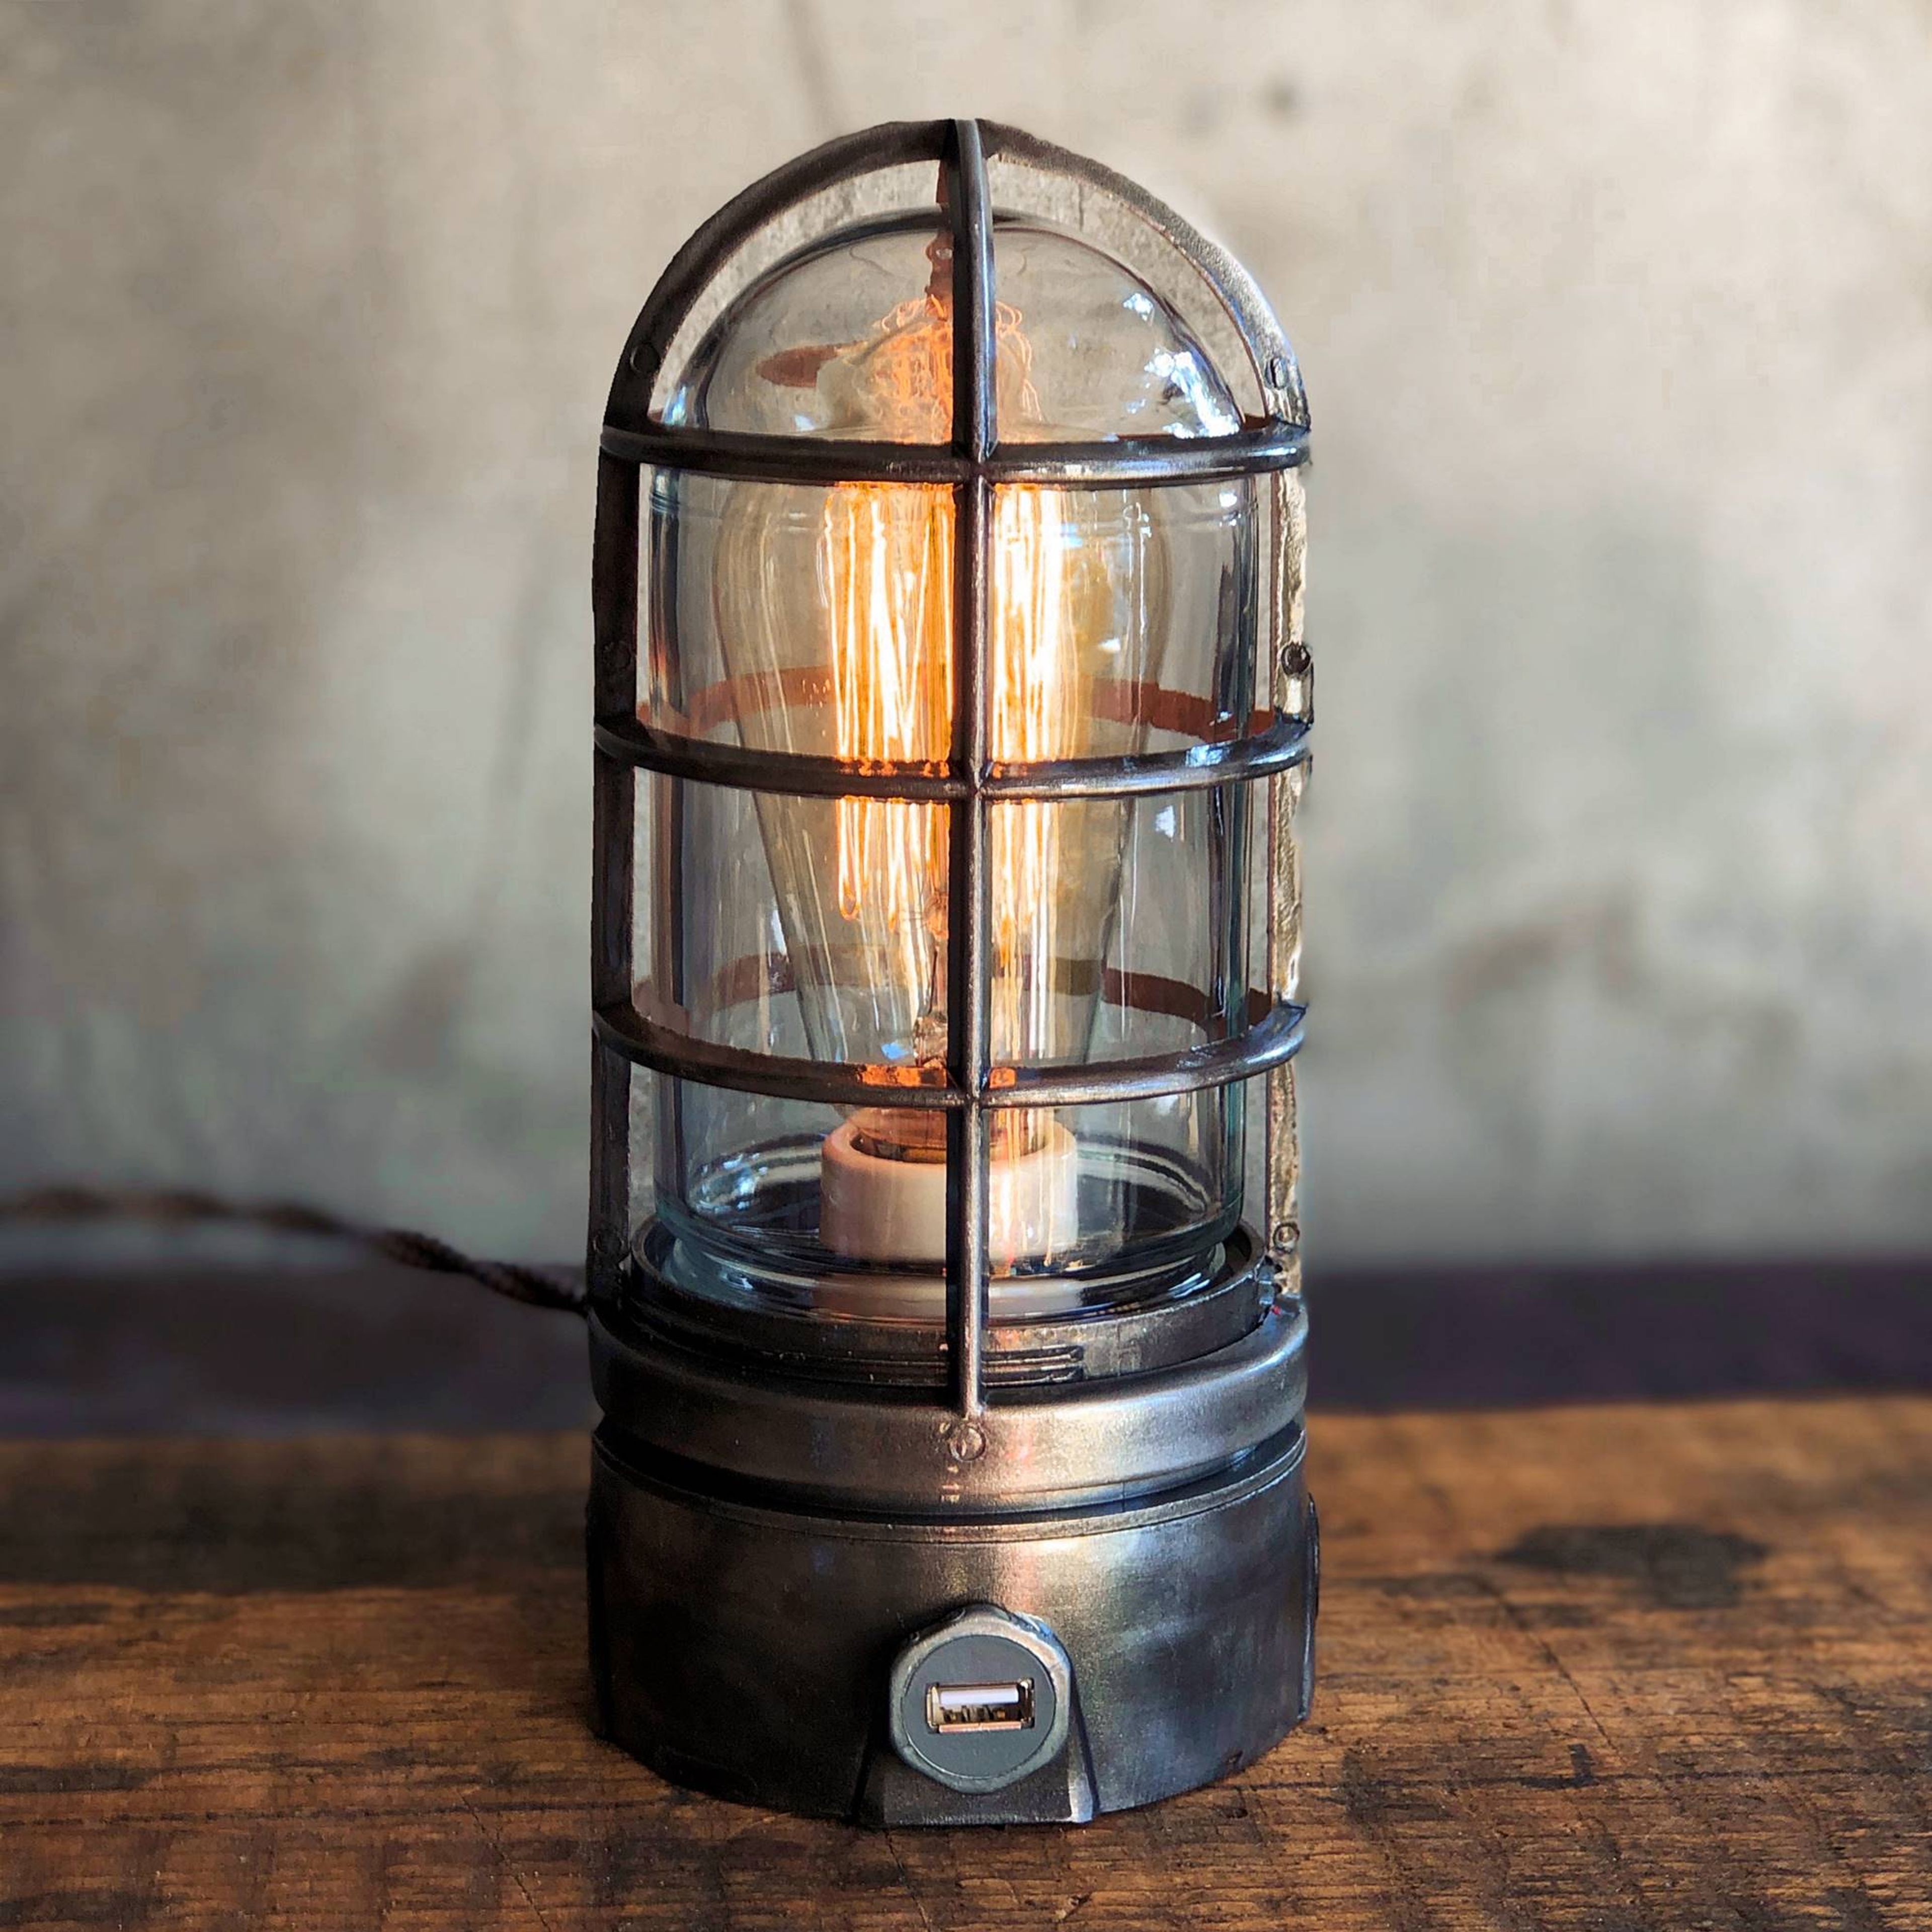 The Cage Lamp - 'Steward'